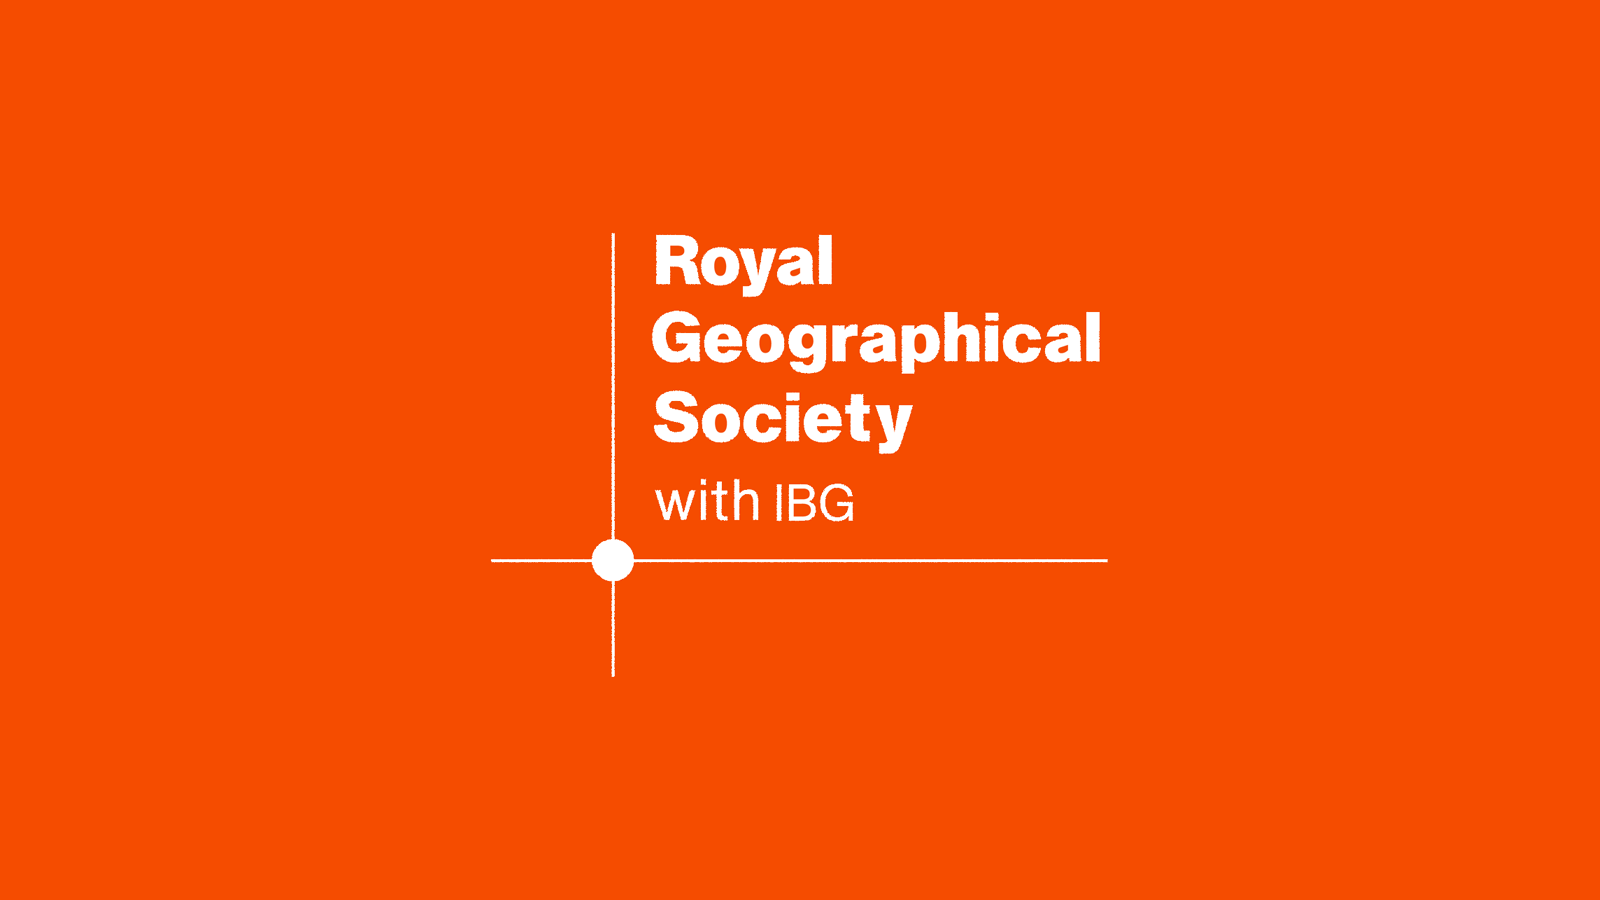 RGS-IBG Postgraduate Research Awards 2021 for PhD Students in the UK (up to £2,000)